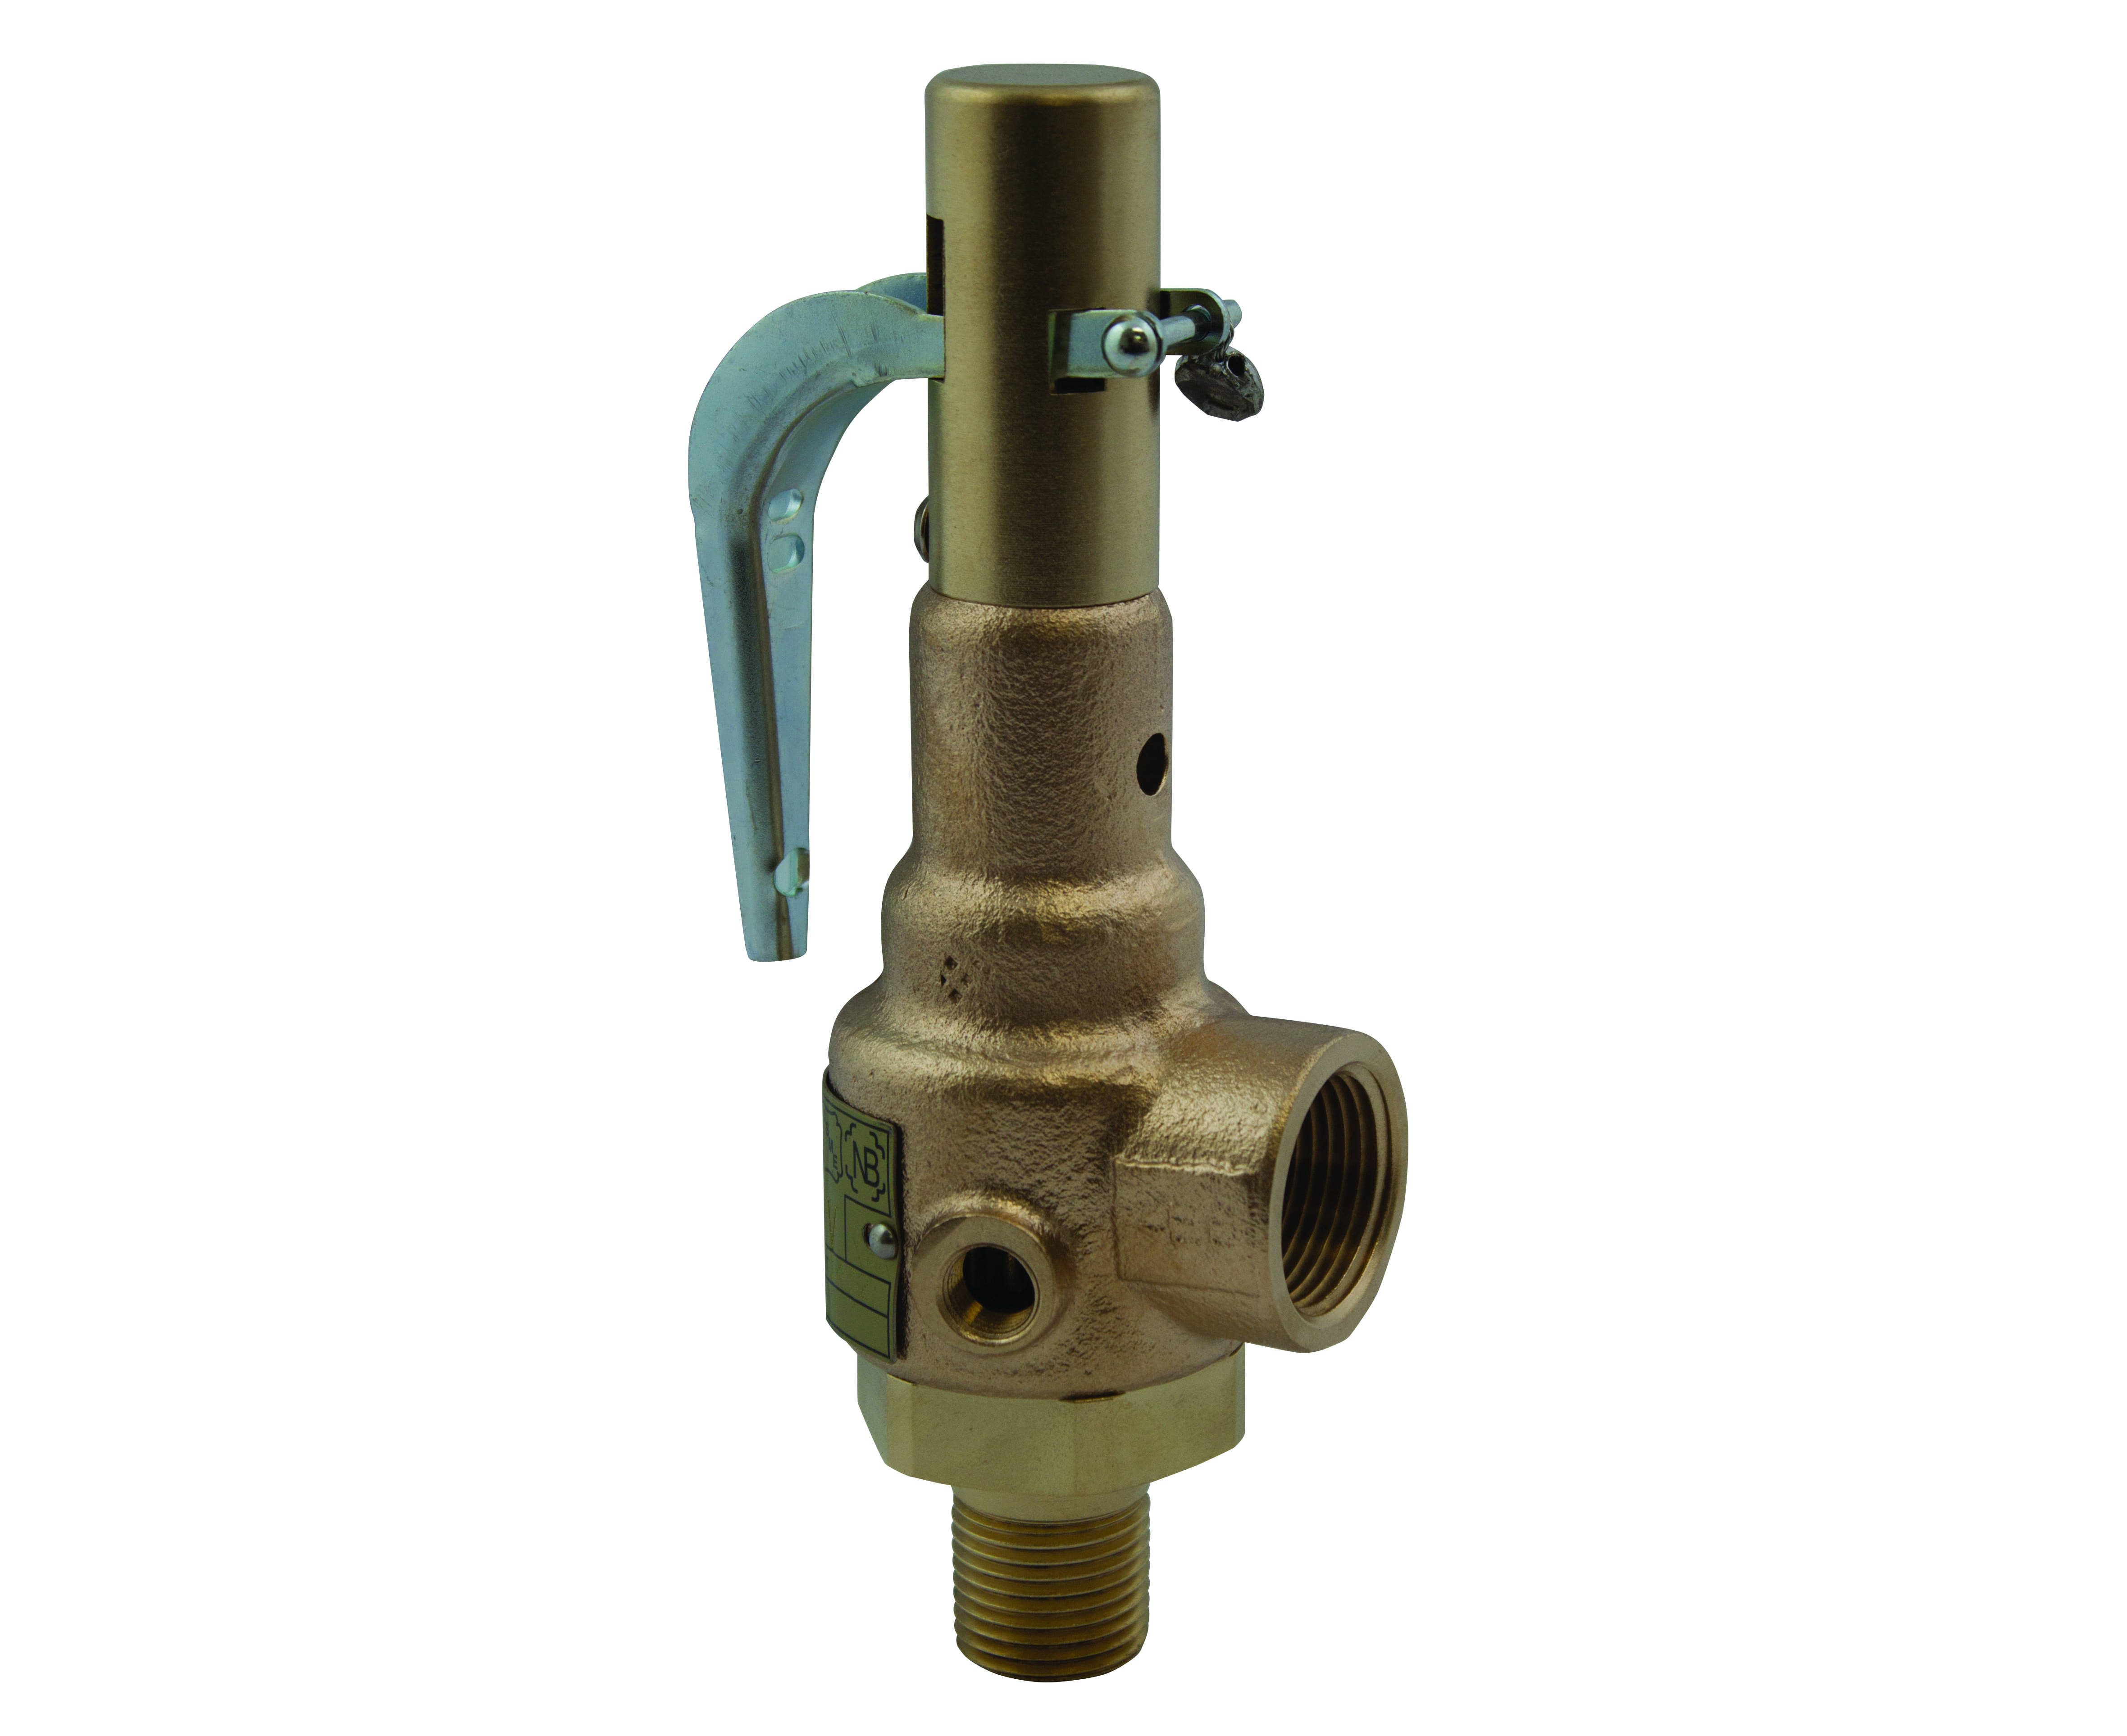 Preview image for Apollo ASME Sec VIII Air Bronze Safety Relief Valves with Brass Trim, Teflon Seat, Oxygen Cleaned, 3/4" x 1" (MNPT x FNPT)